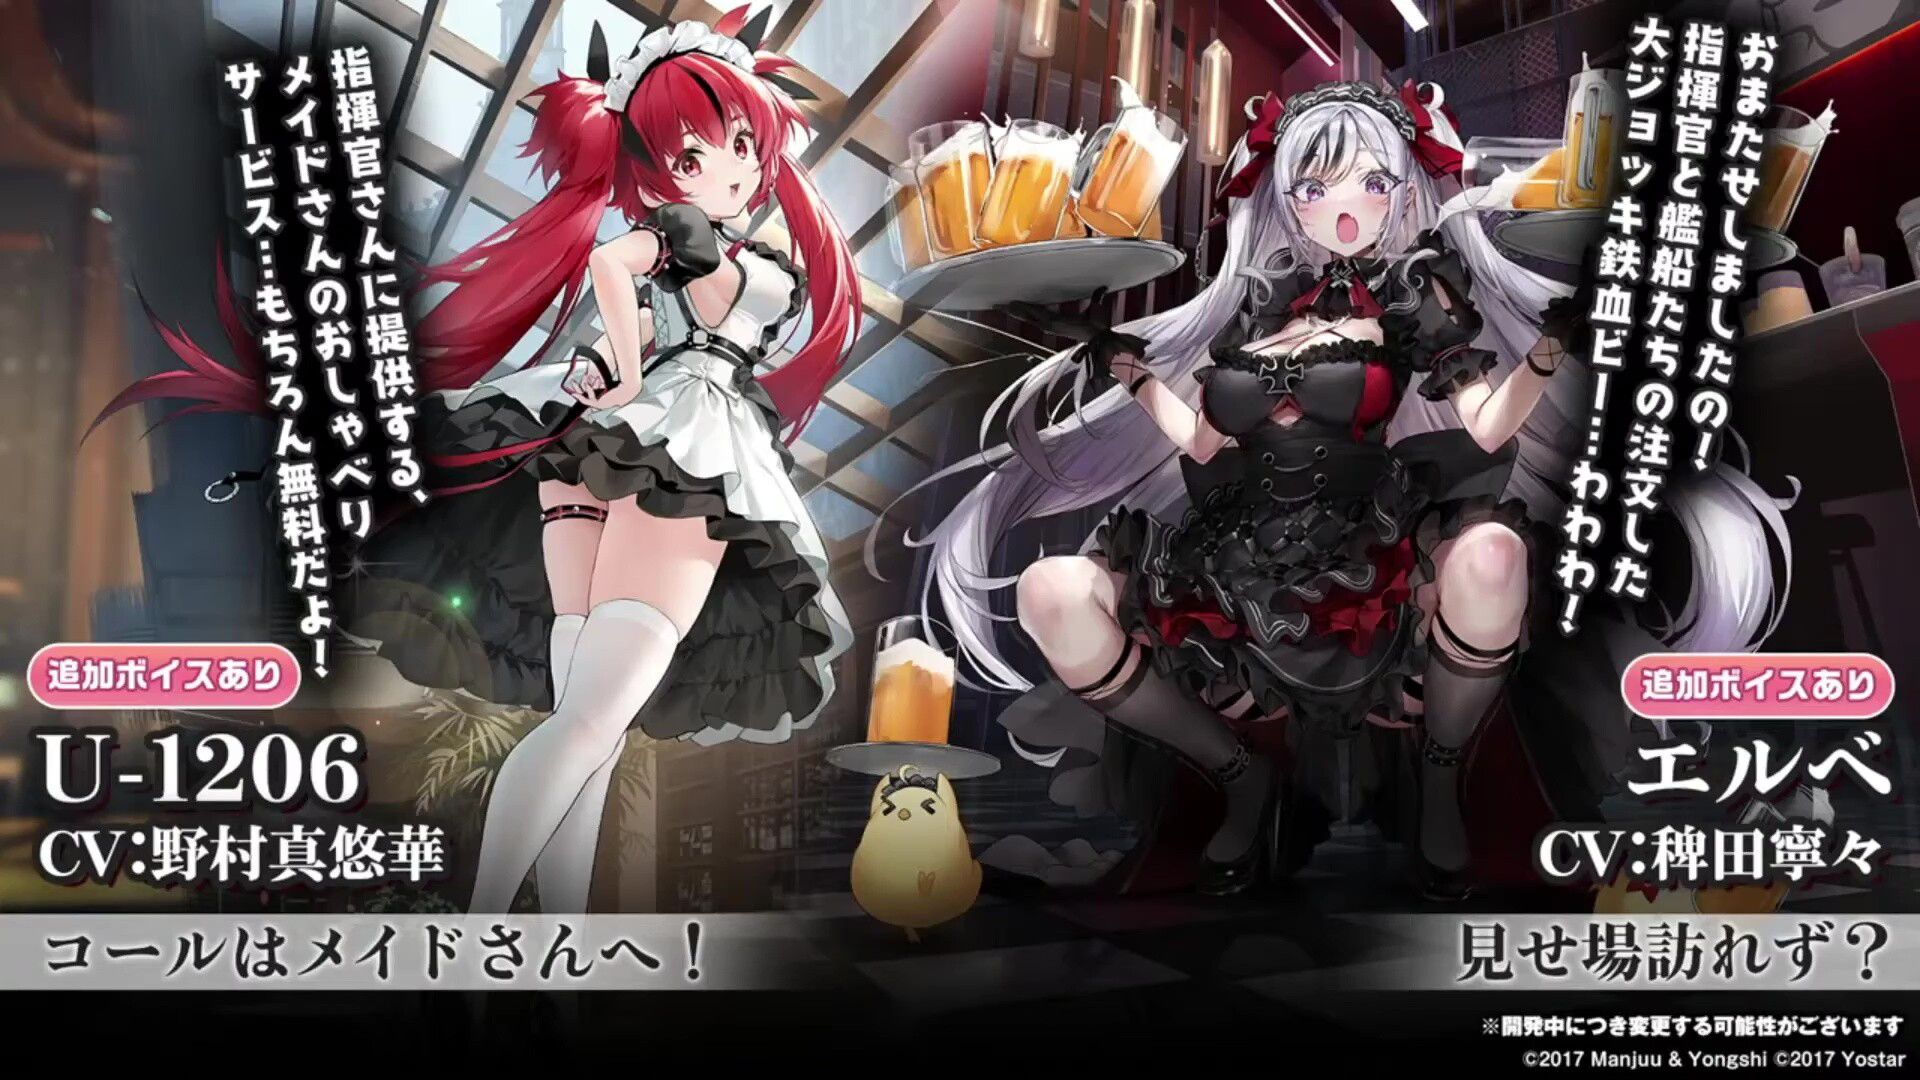 Erotic costumes such as "Azur Lane" erotic new character, whipmuchiro Santa and whipmuchi erotic maid clothes 18